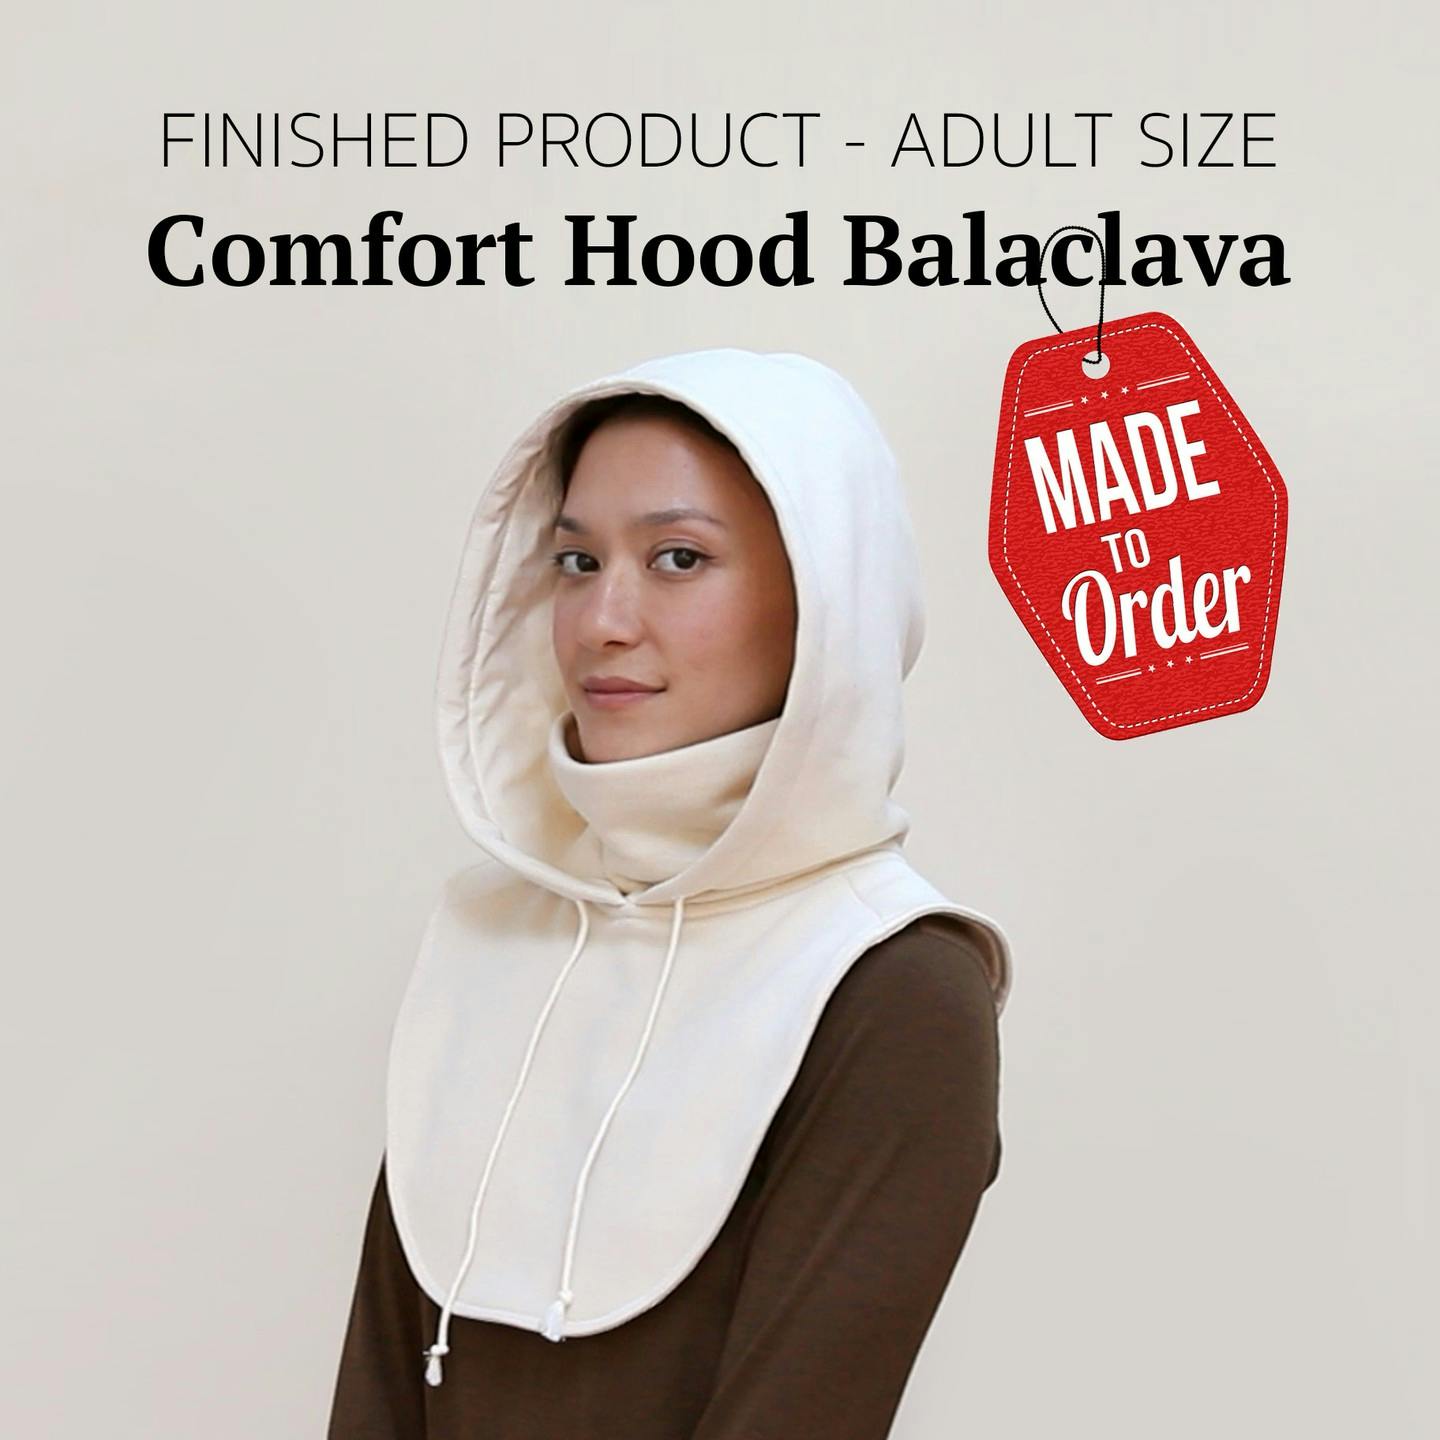 Hi there! I'm gonna try something new and I'm kinda scared!! I'll be selling the Comfort Hood as a finished product, made to order, just one size for now, adult size 55-59 cm of head circumference. I will be sewing them but also... someone else will.
So remember when I said in a story that I was showing a friend's sister how to sew? The friend is first a friend of my bf's, they're both Colombians, living in France. She is a lawyer and human rights activist. I've only known her for a year but in this meantime she's helped 2 people, a friend and a cousin emigrate here in all legality (they easily got papers for being gay). Two weeks ago, she helped her aunt and uncle come over with their 2 kids, and so the 18 yo young lady who wanted to learn how to sew is one of them (so it's her cousin, not her sis, whatever). She's already learning French to enter uni next year, earning money doing some cleanings, and because she loves fashion, she came to me to learn sewing. Since some of you guys have been asking for already made hoods, a new opportunity appeared so I thought of her making them that way she can support her family a bit (her dad already found a job but the mom hasn't yet and the brother is very young). I'll be there to make sure the quality is good and to do the customer service with you in English/French. She'll be in charge when it's Spanish though, so she can learn a bit how a small Etsy shop works! I think it can be a nice opportunity!
Thanks for your support!!!
.
.
.
#balaclava #snood #comforthood #winter #winteroutfit #neckwarmer #neckwarmers #hoodie #hood